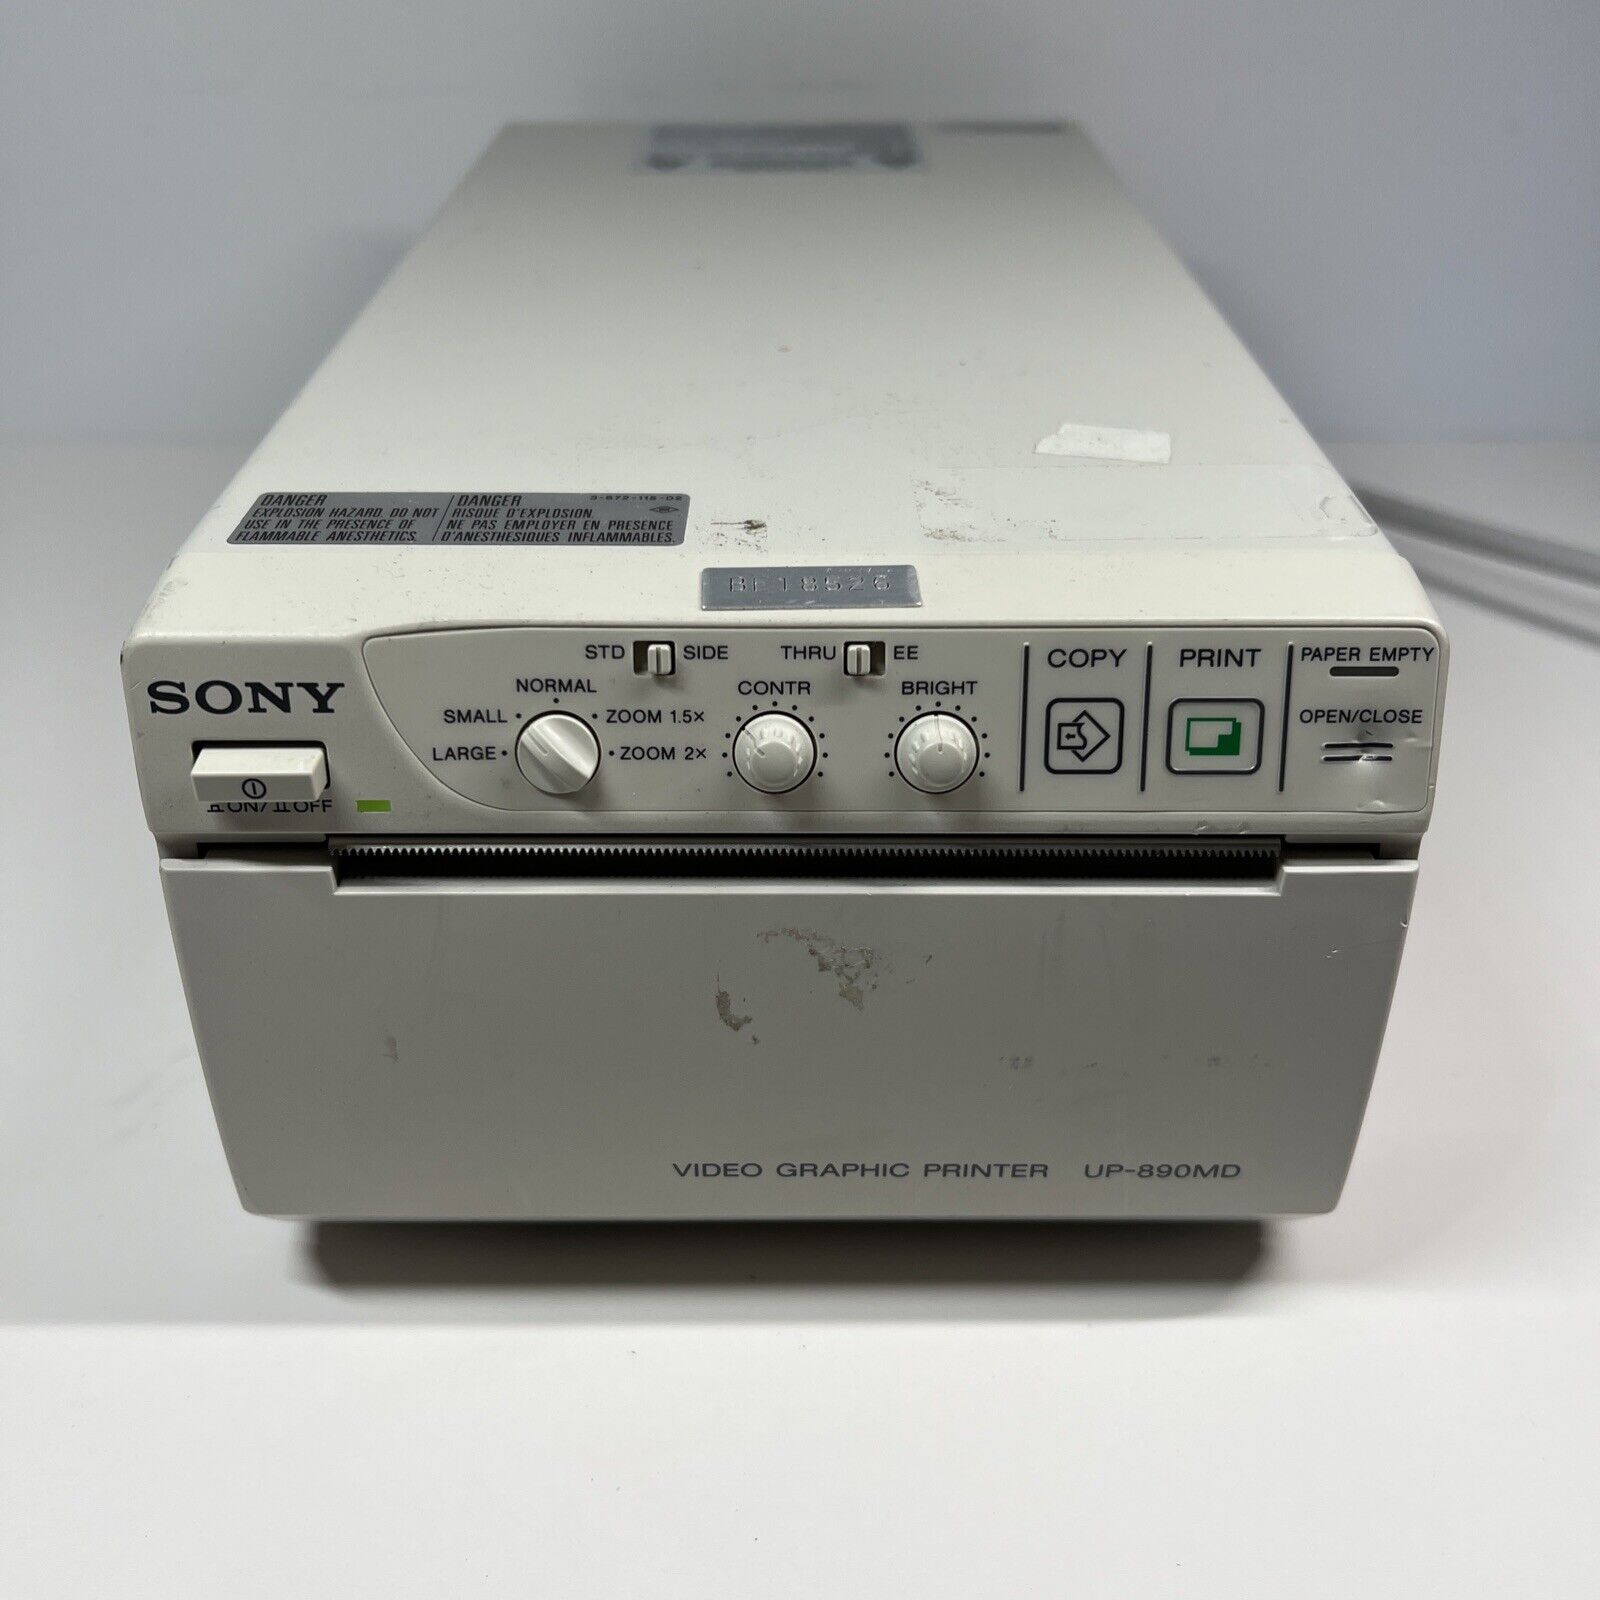 Sony UP-890MD Video Graphic Printer - AS-IS UNTESTED